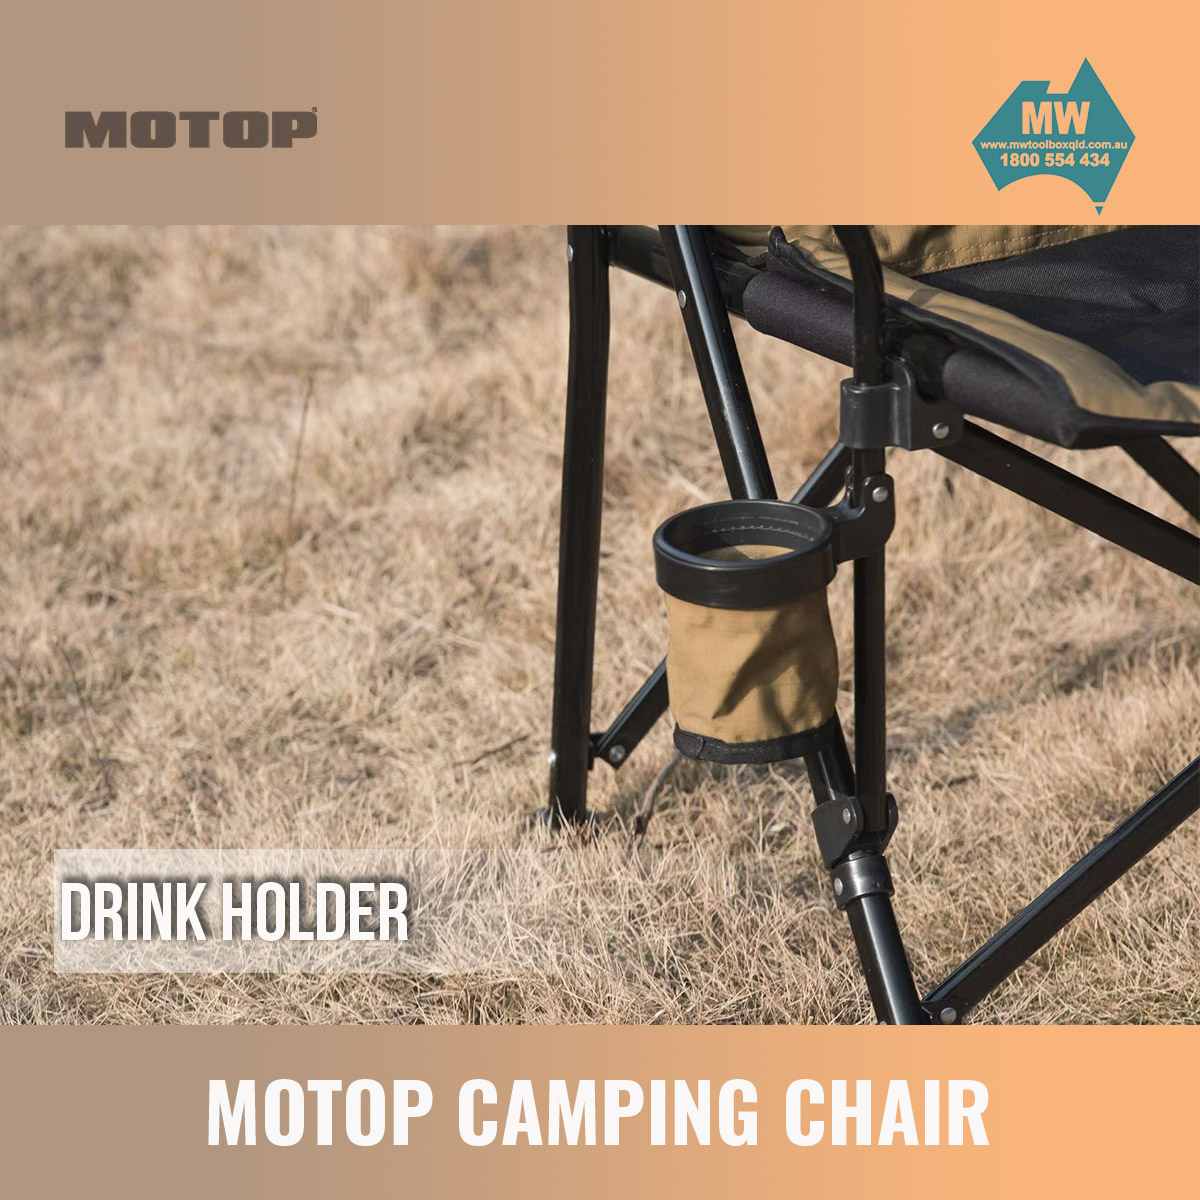 Motop-Camping-Chair-3